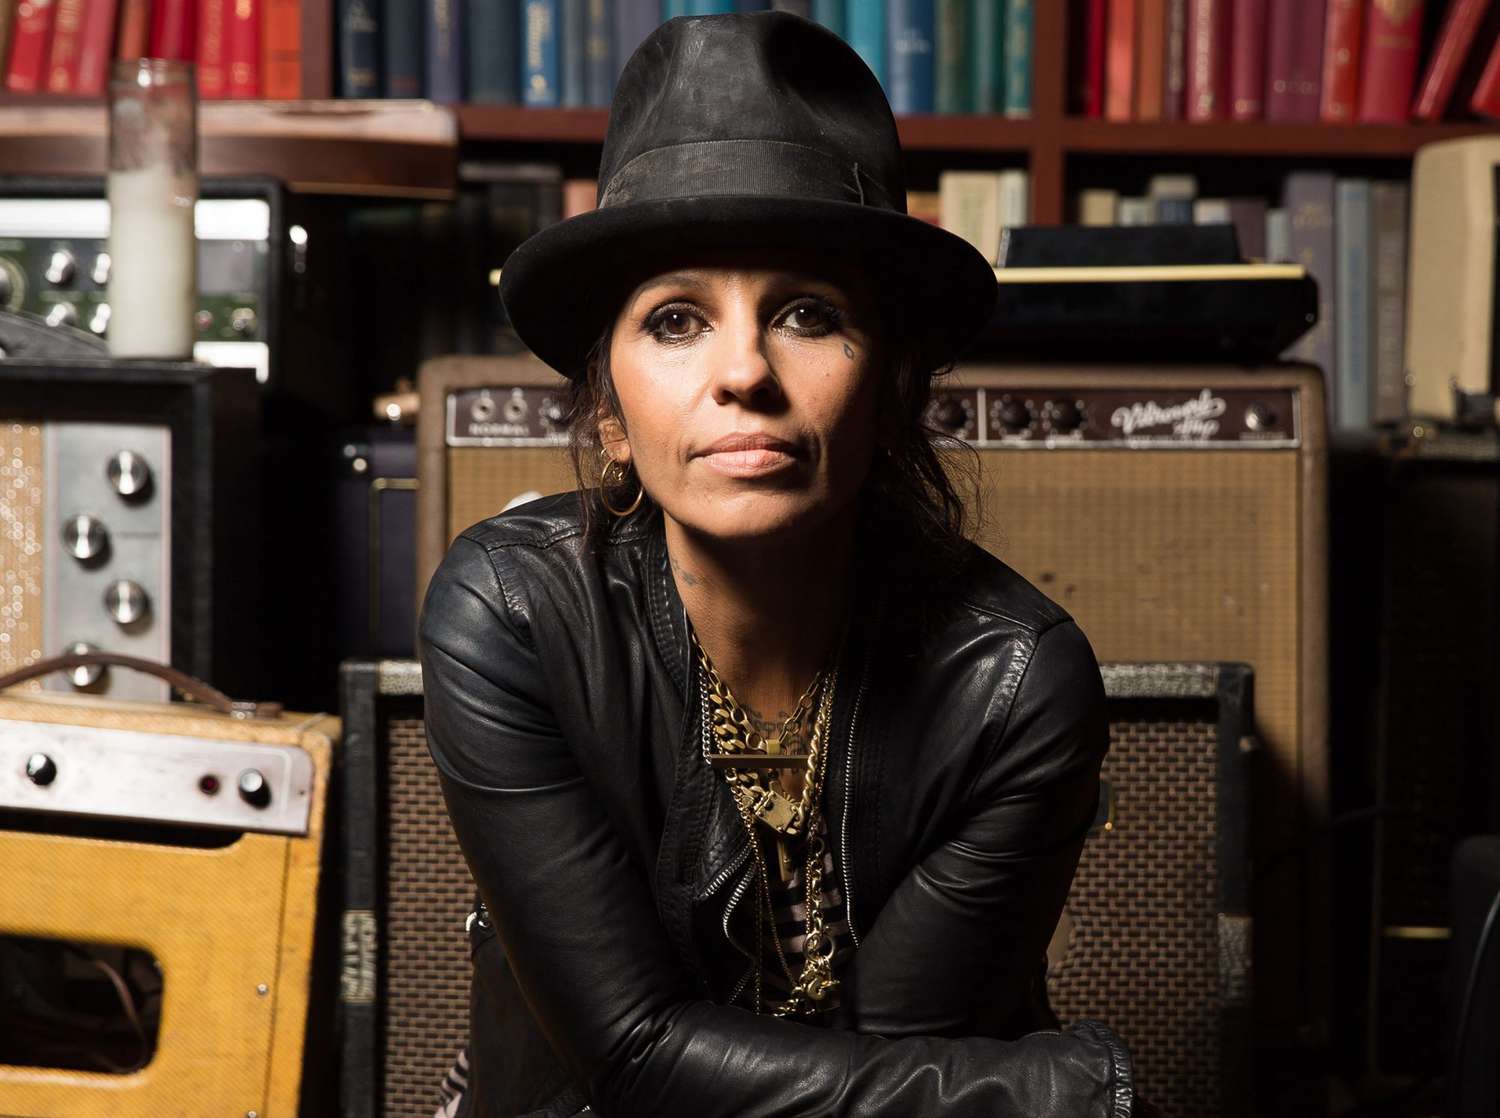 Linda Perry Interview / Portrait Session, Los Angeles, USA